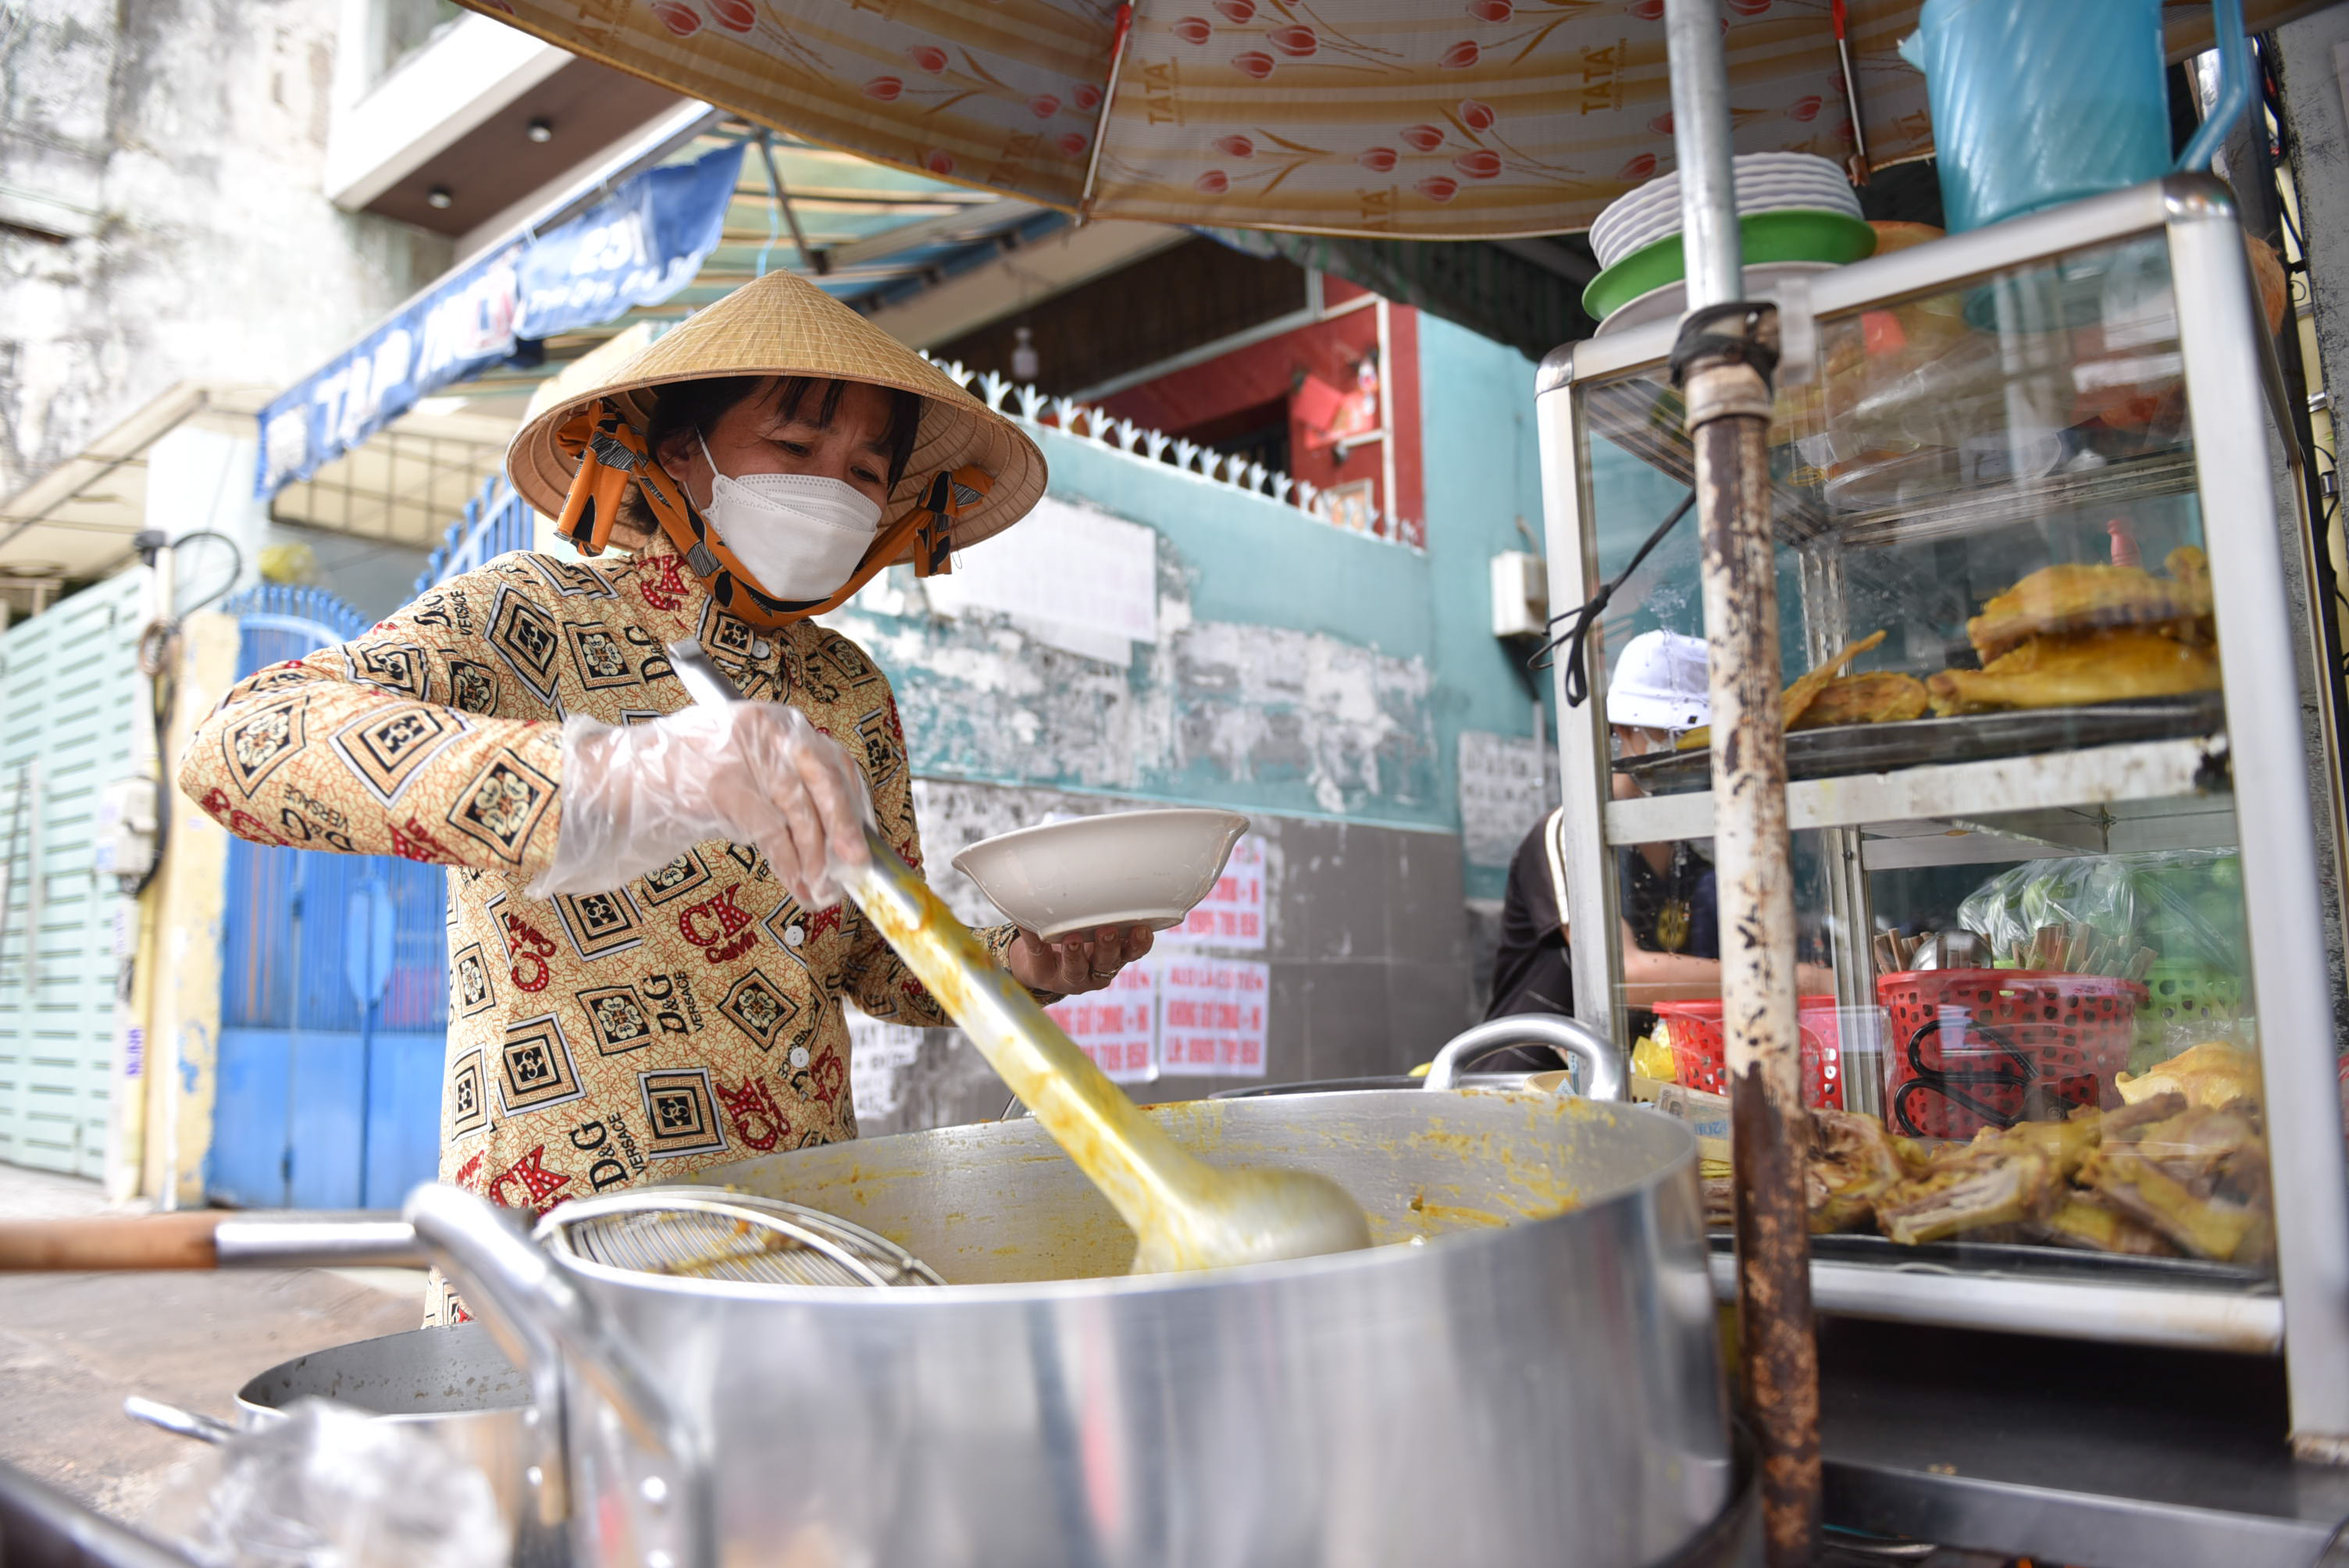 Tran Thi Trinh, owner of Chi Muoi in District 11, Ho Chi Minh City, has run her stall for the past 20 years. Its menu changes on a daily basis. Photo: Ngoc Phuong / Tuoi Tre News